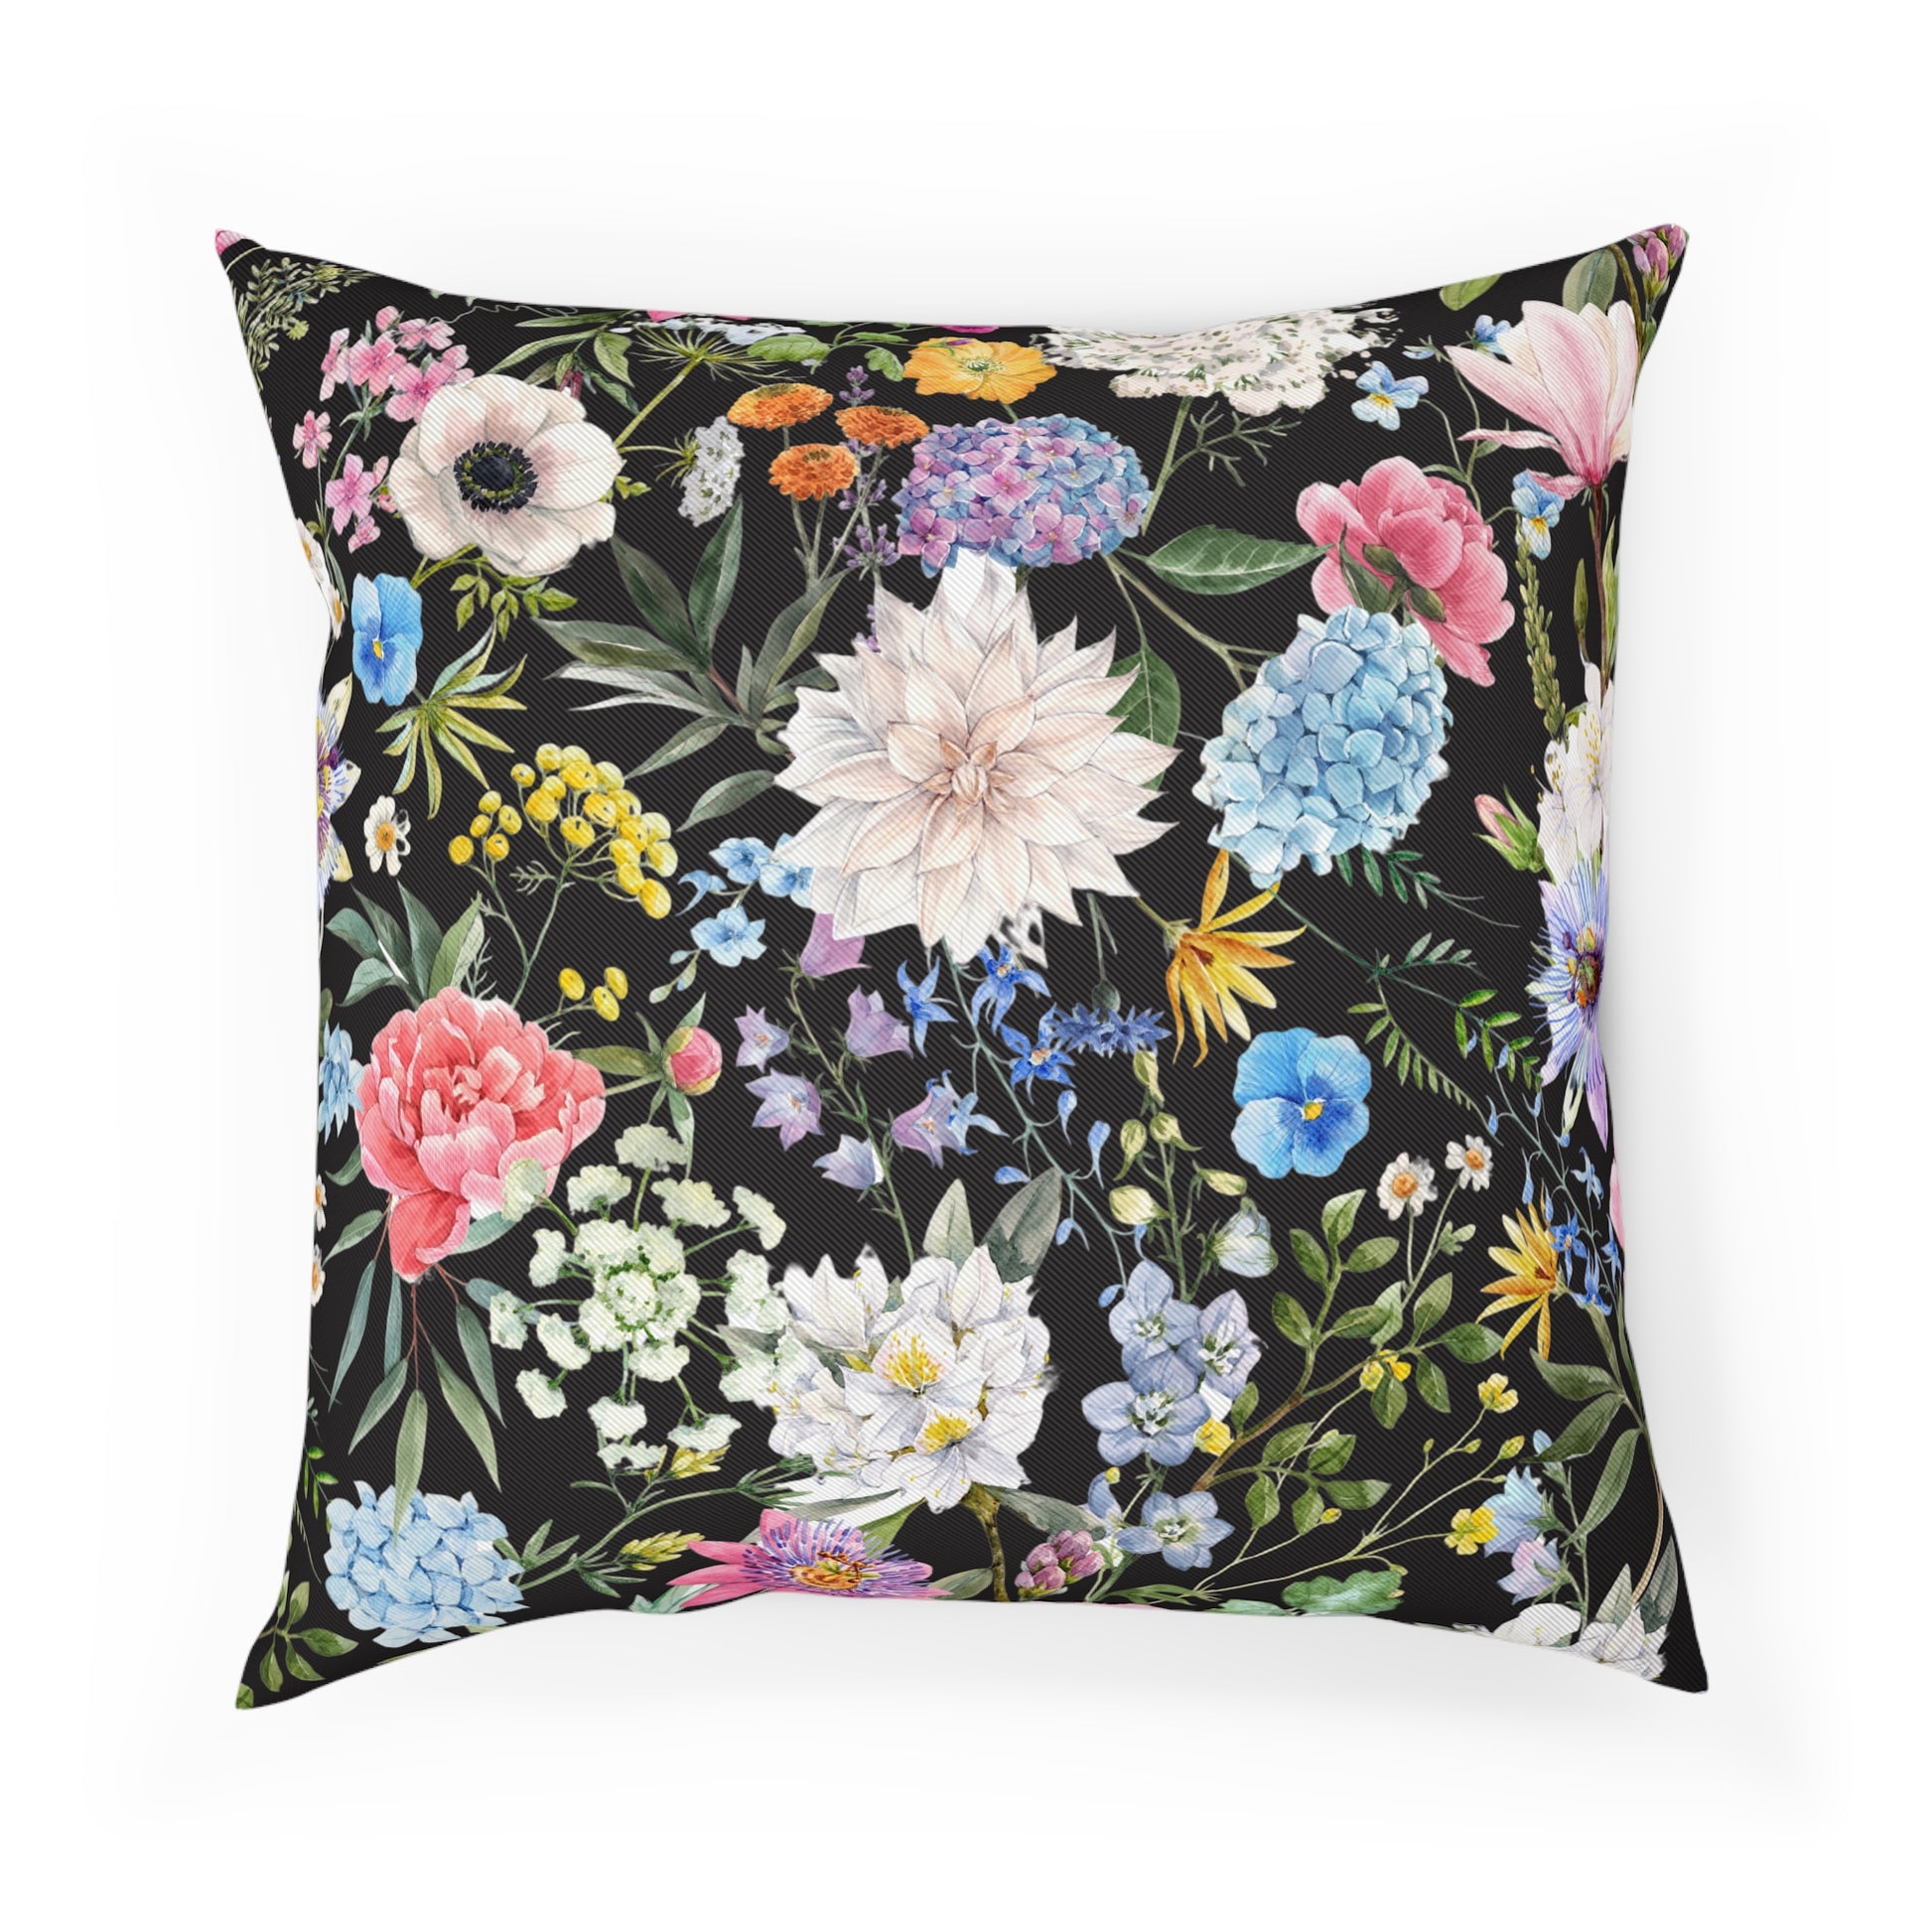 Vintage Maximalist Floral Throw Pillow 100% Cotton Cushion Cover